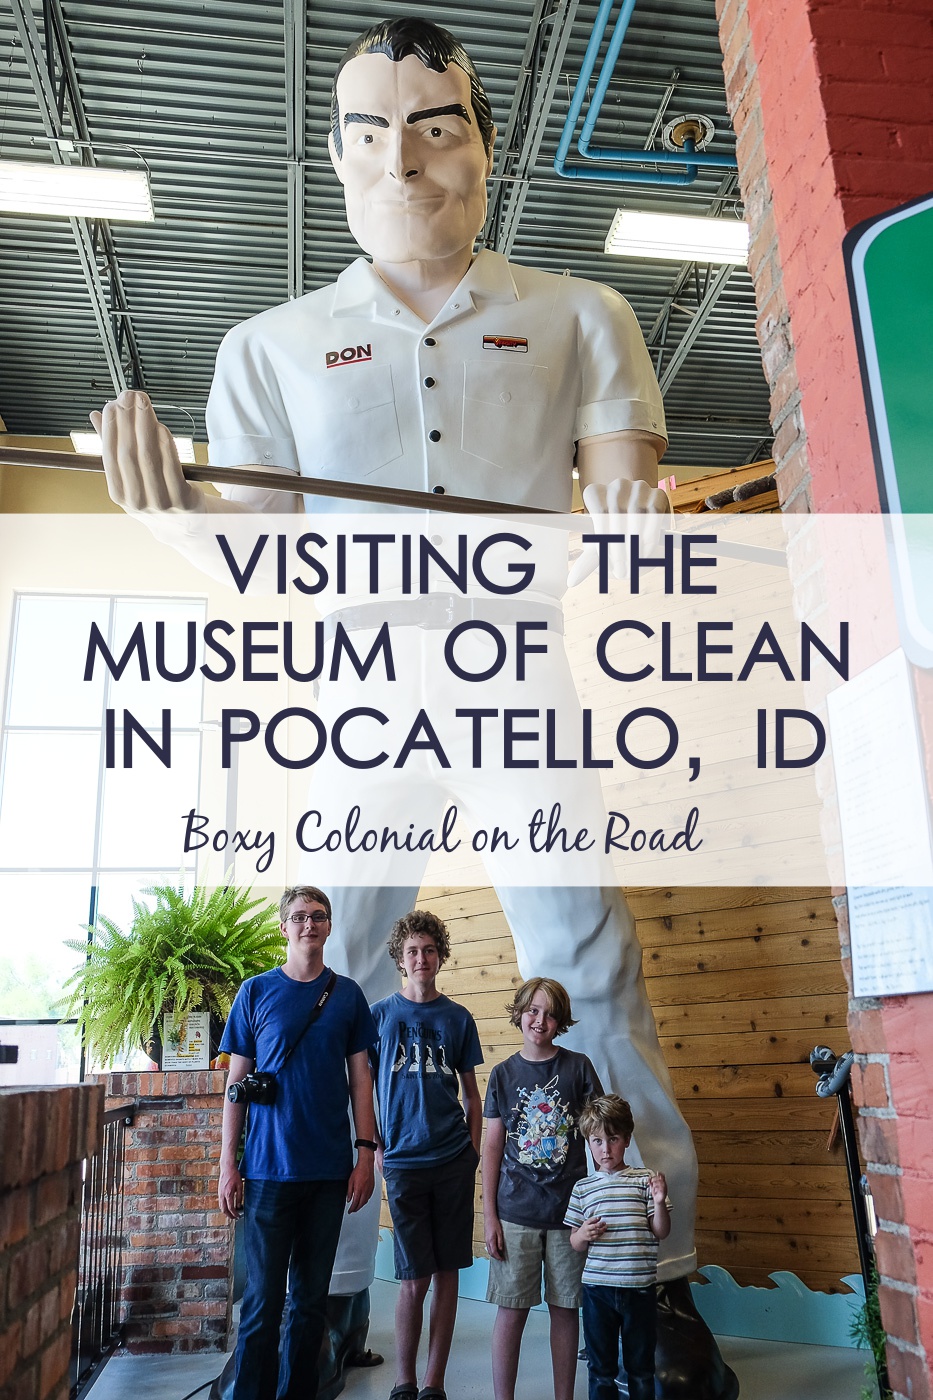 Visiting the museum of Clean in Pocatello, ID